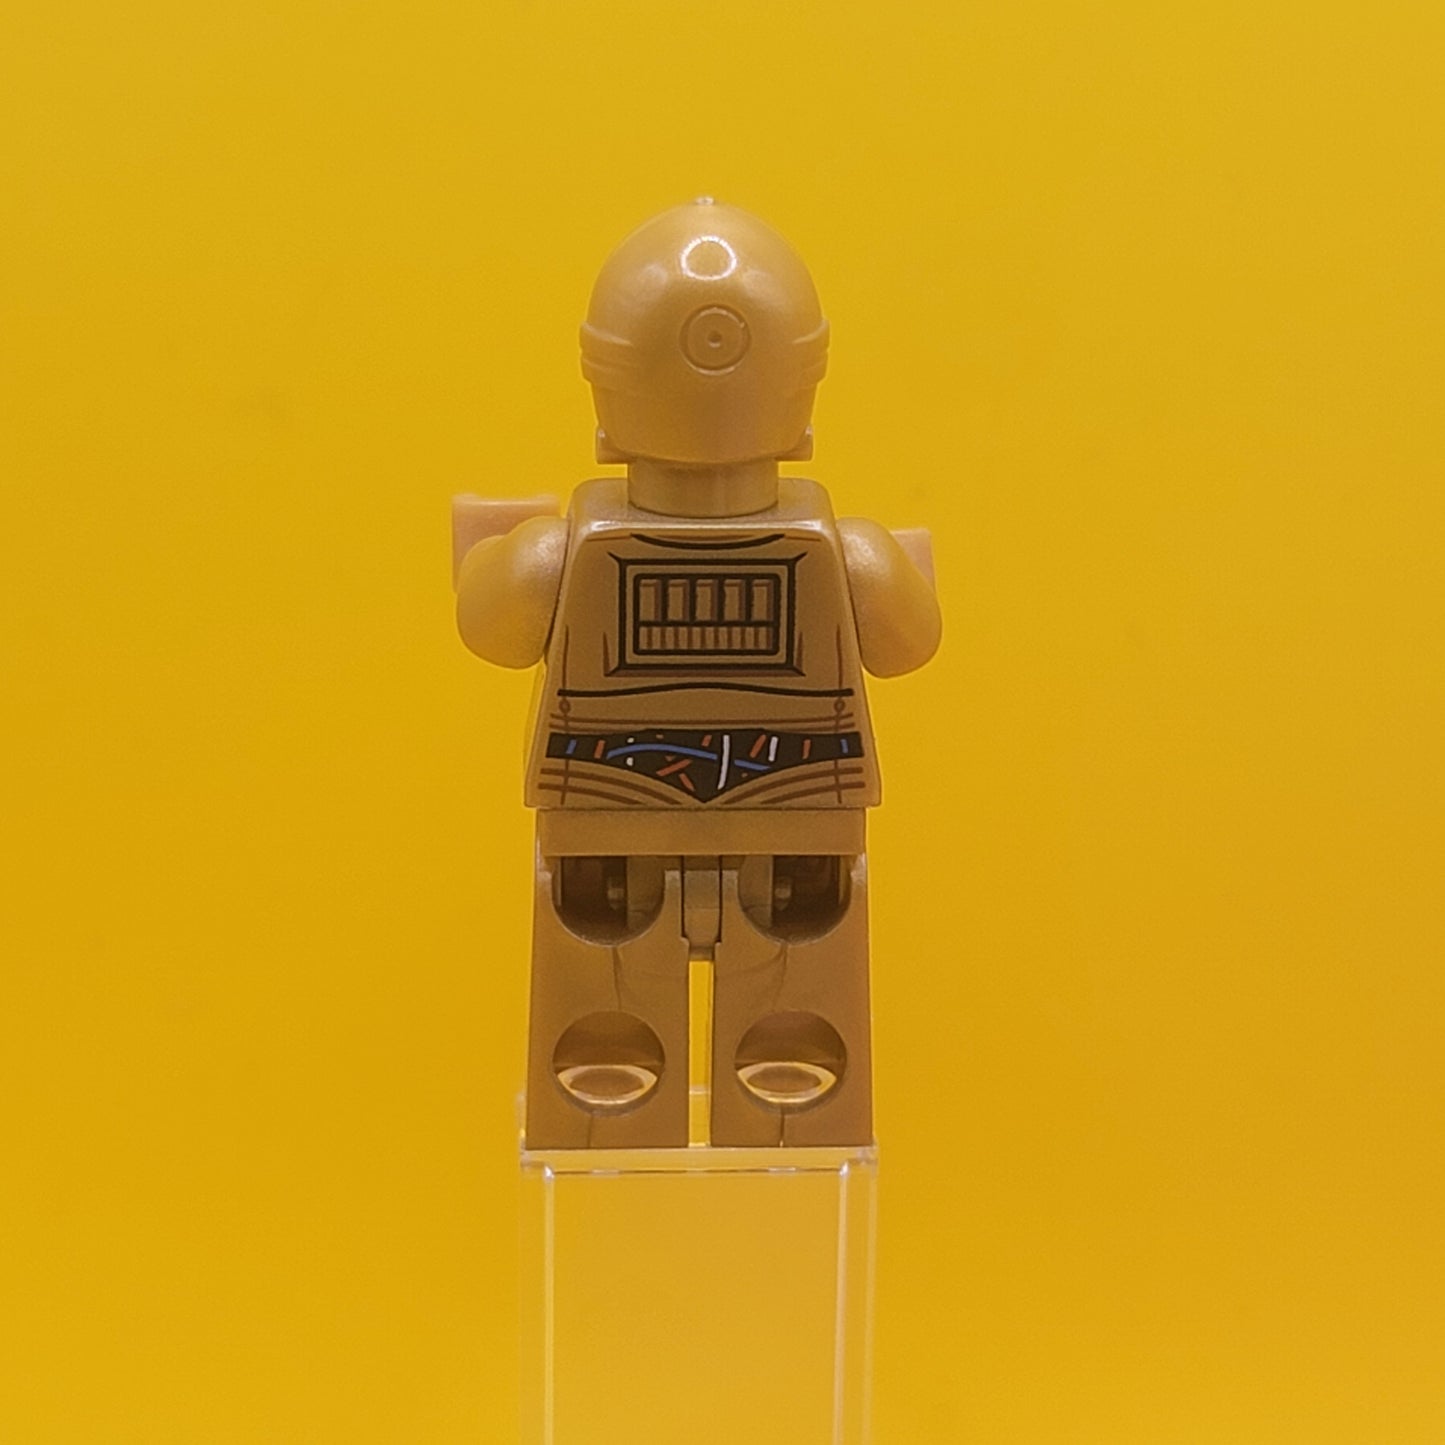 C-3PO Colorful Wires Pattern Minifigure Lego sw0365